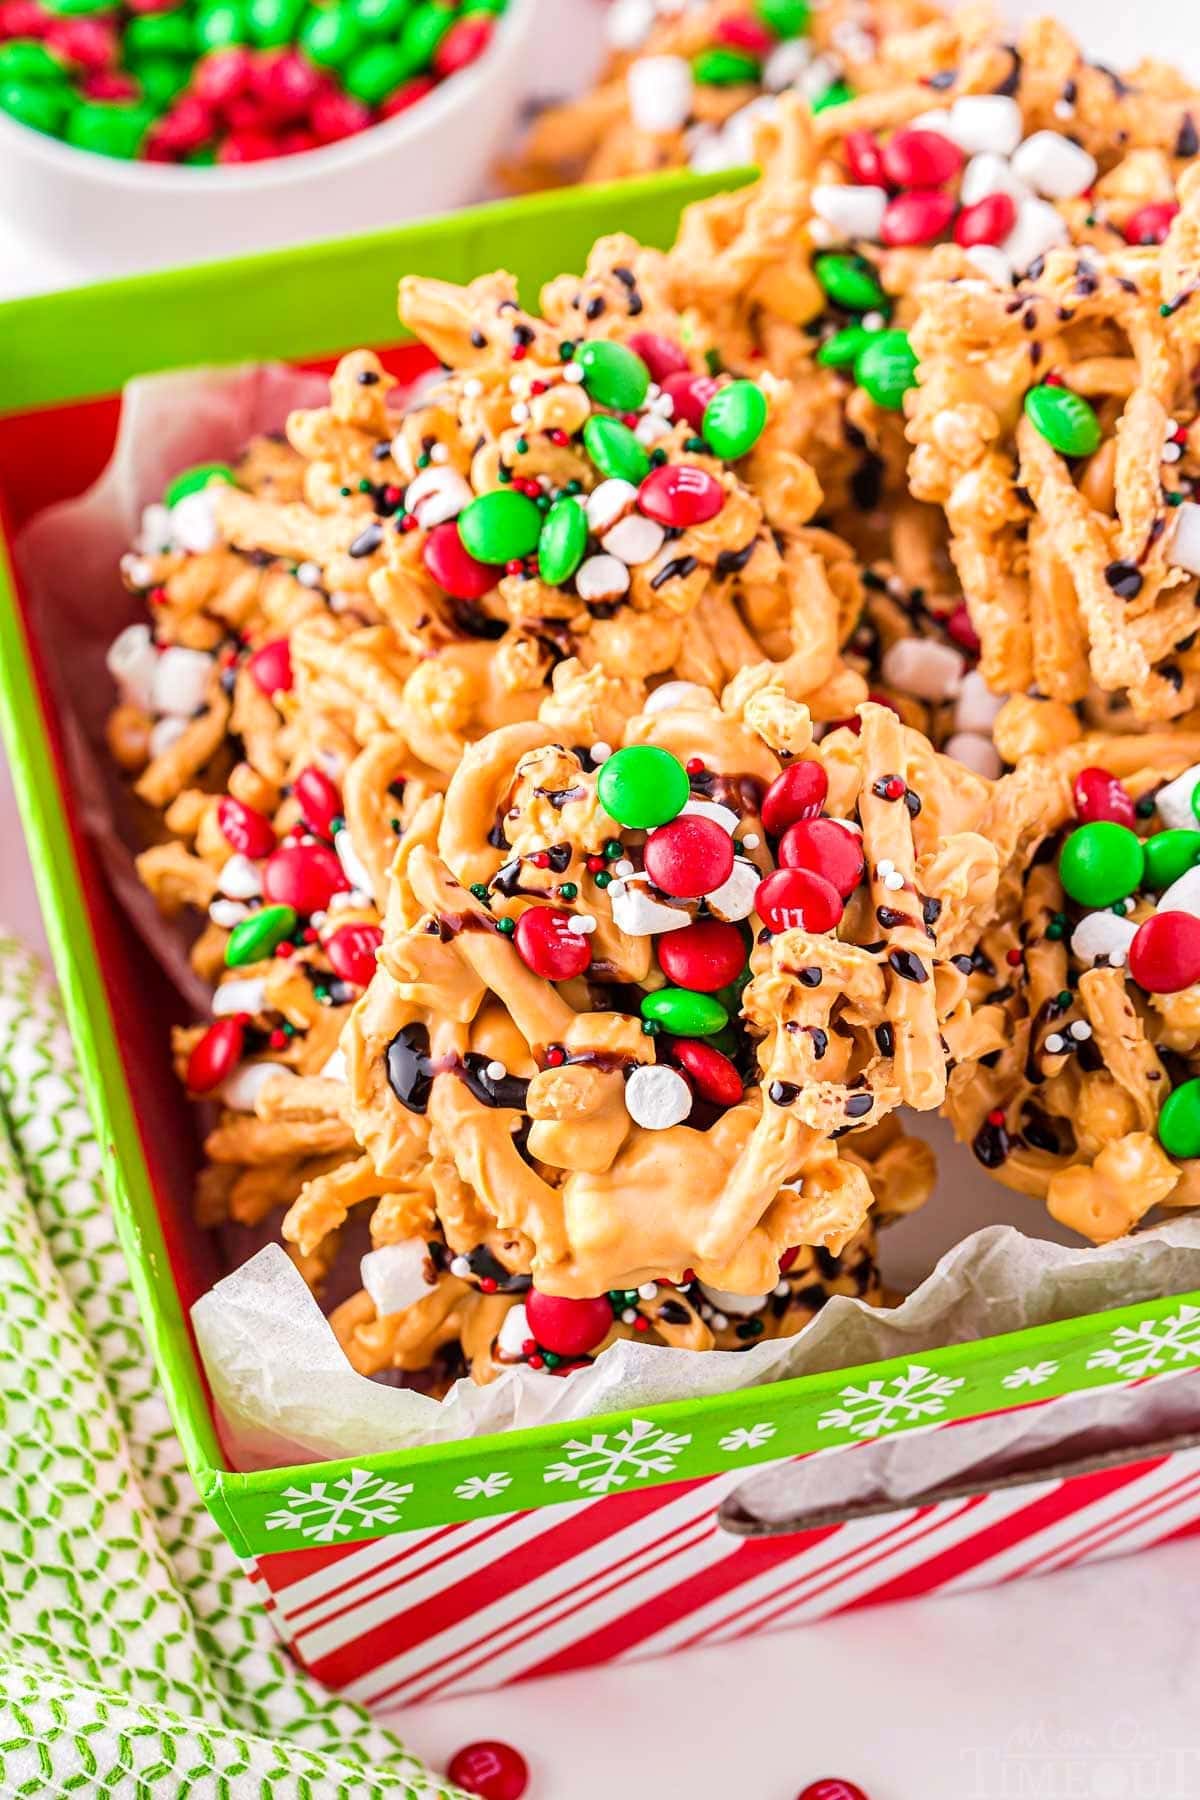 Cookies Piled high with marshmallows, chocolate syrup, sprinkles, and M&Ms.